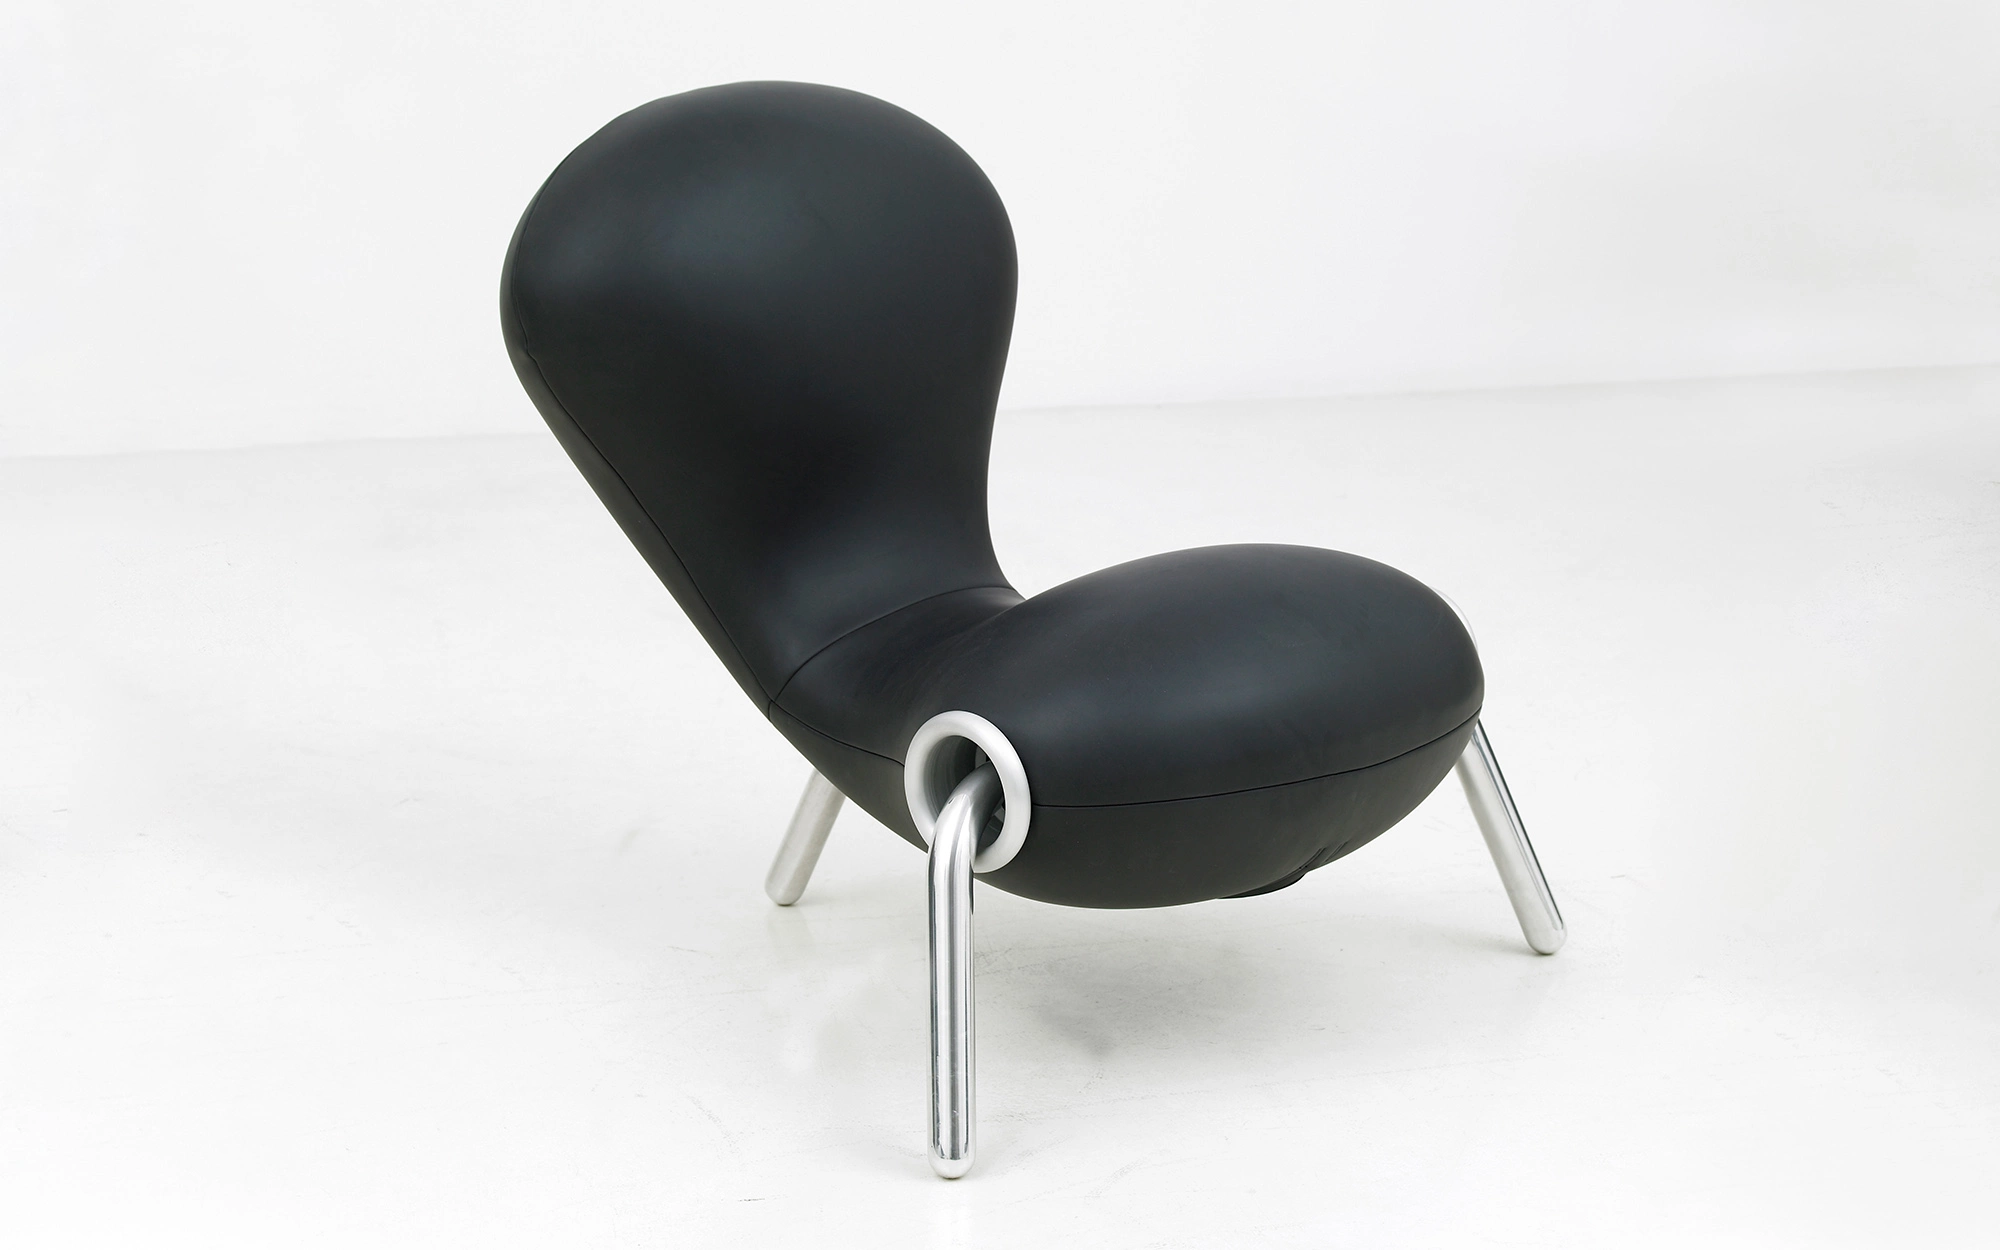 Embryo Chair - Marc Newson - Miscellaneous - Galerie kreo